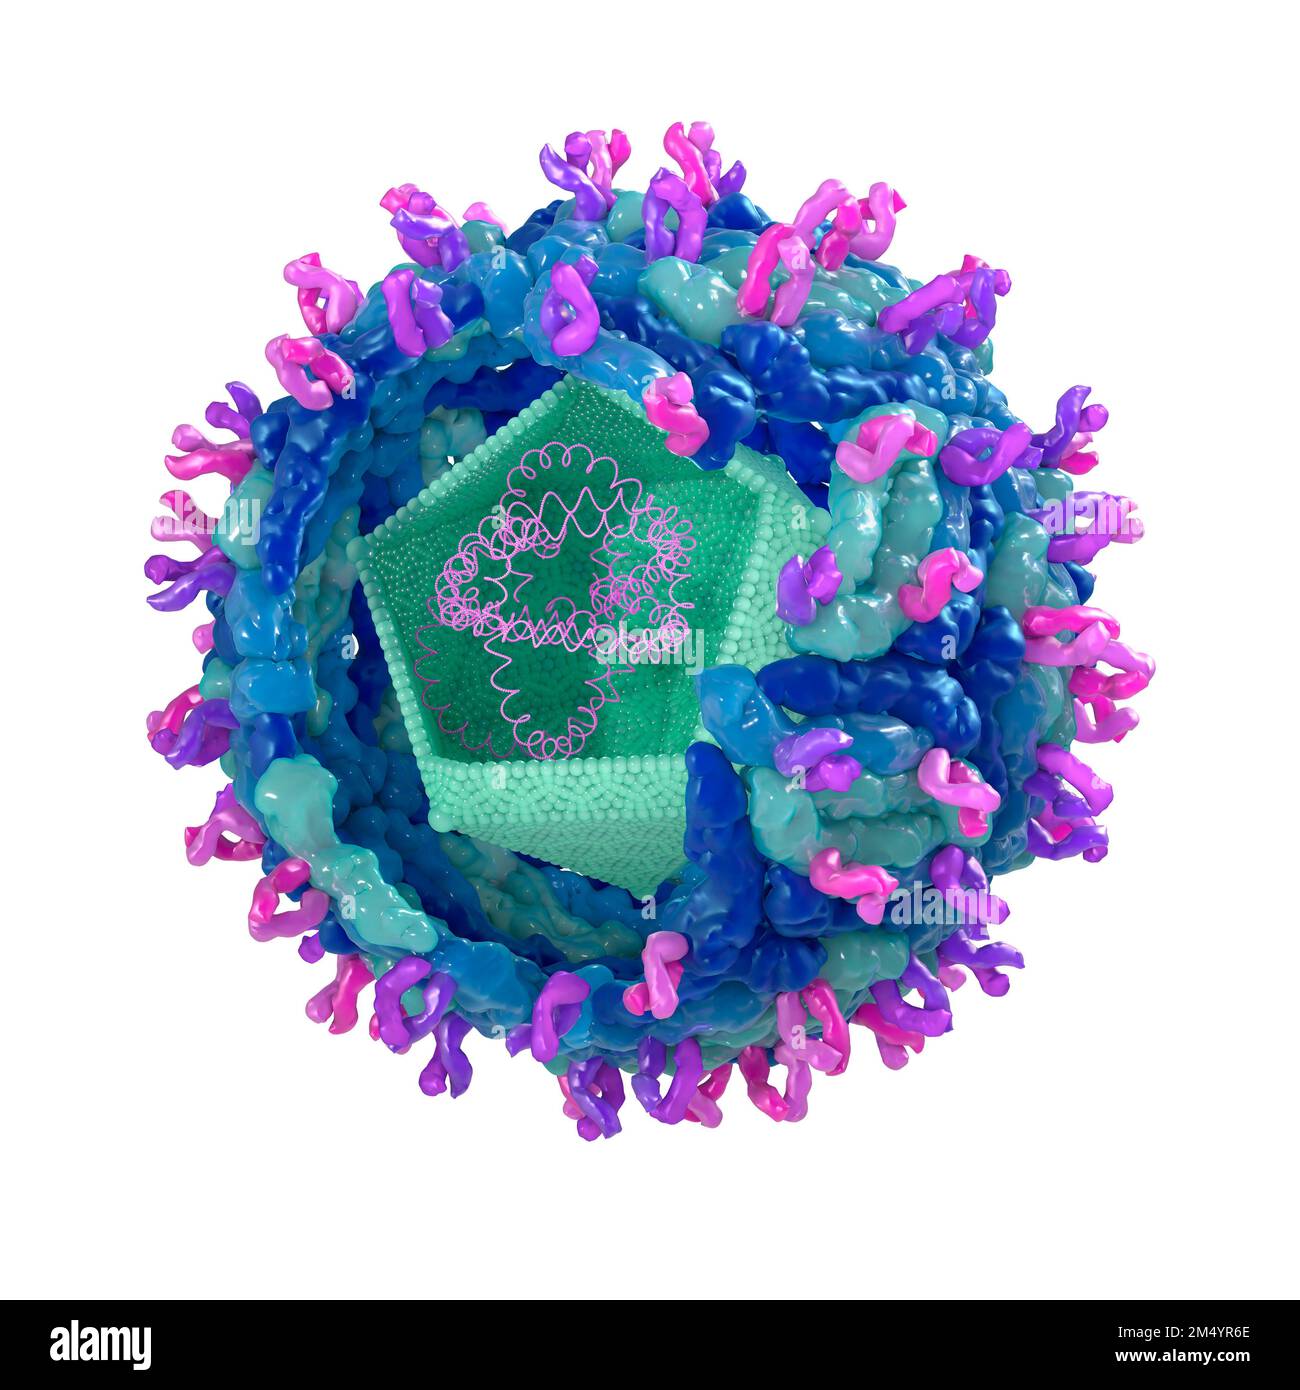 West Nile virus structure, illustration. The west nile virus can cause encephalitis in humans. It is transmitted by mosquitoes. Stock Photo